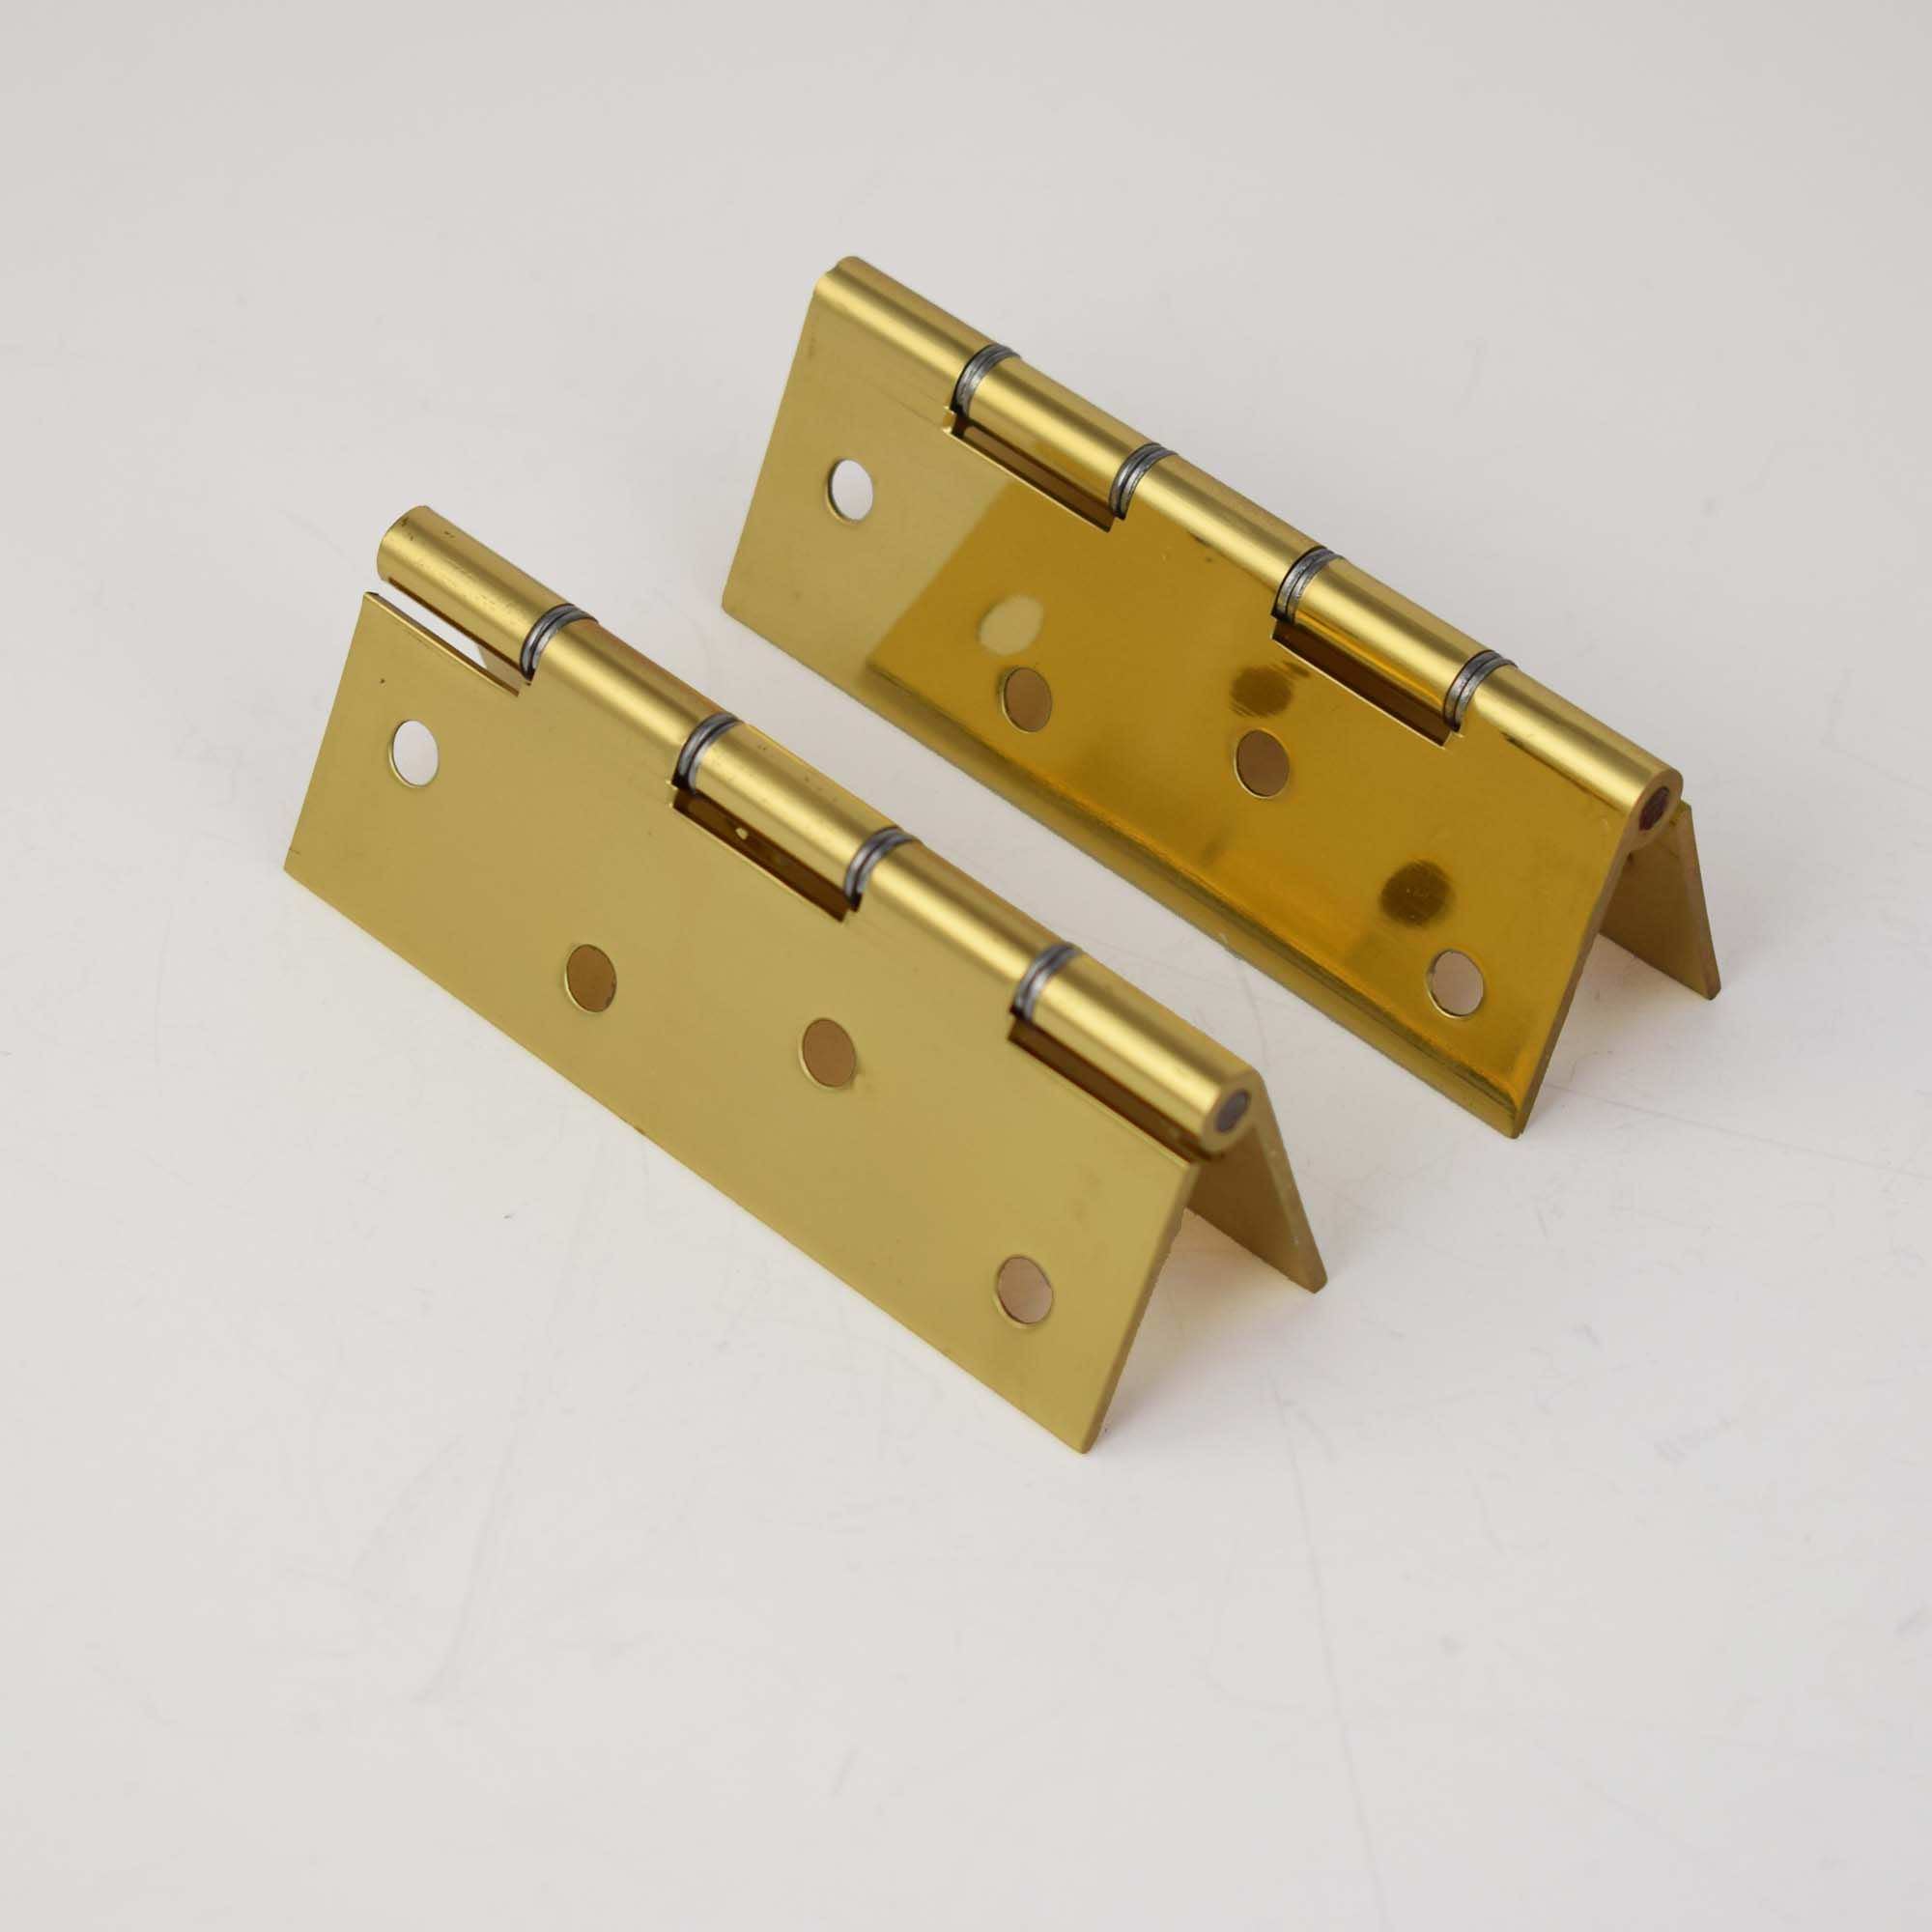 Pair of brass polished hinges 